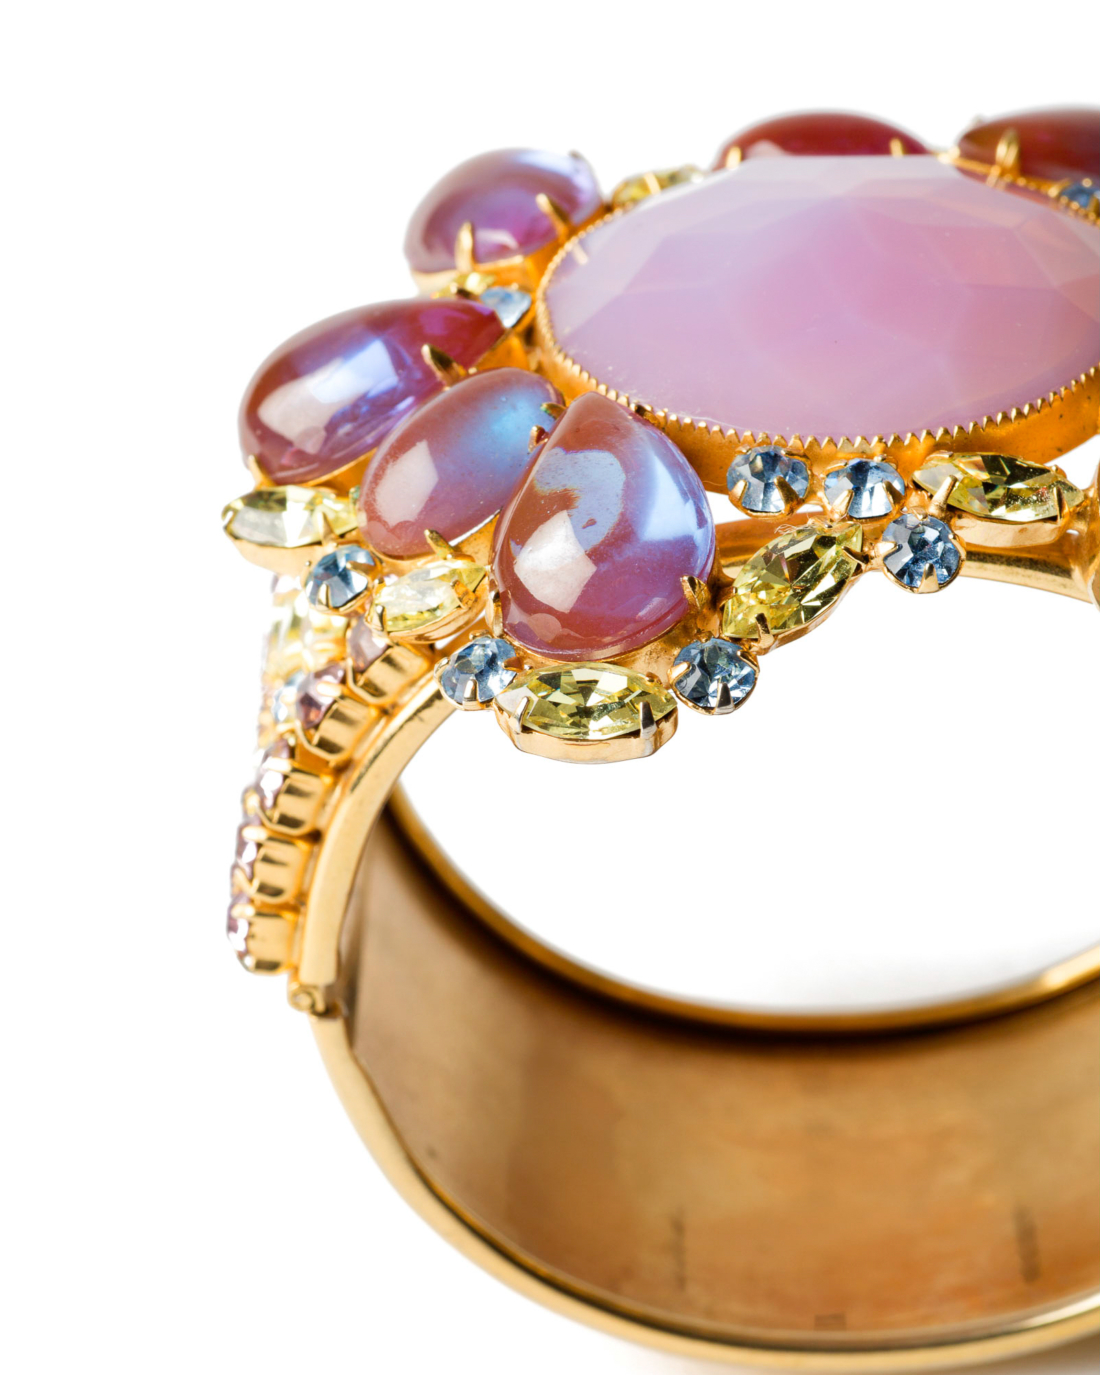 Stunning Couture Saphiret and Pink Opal Glass Jeweled Bracelet, circa 1950’s